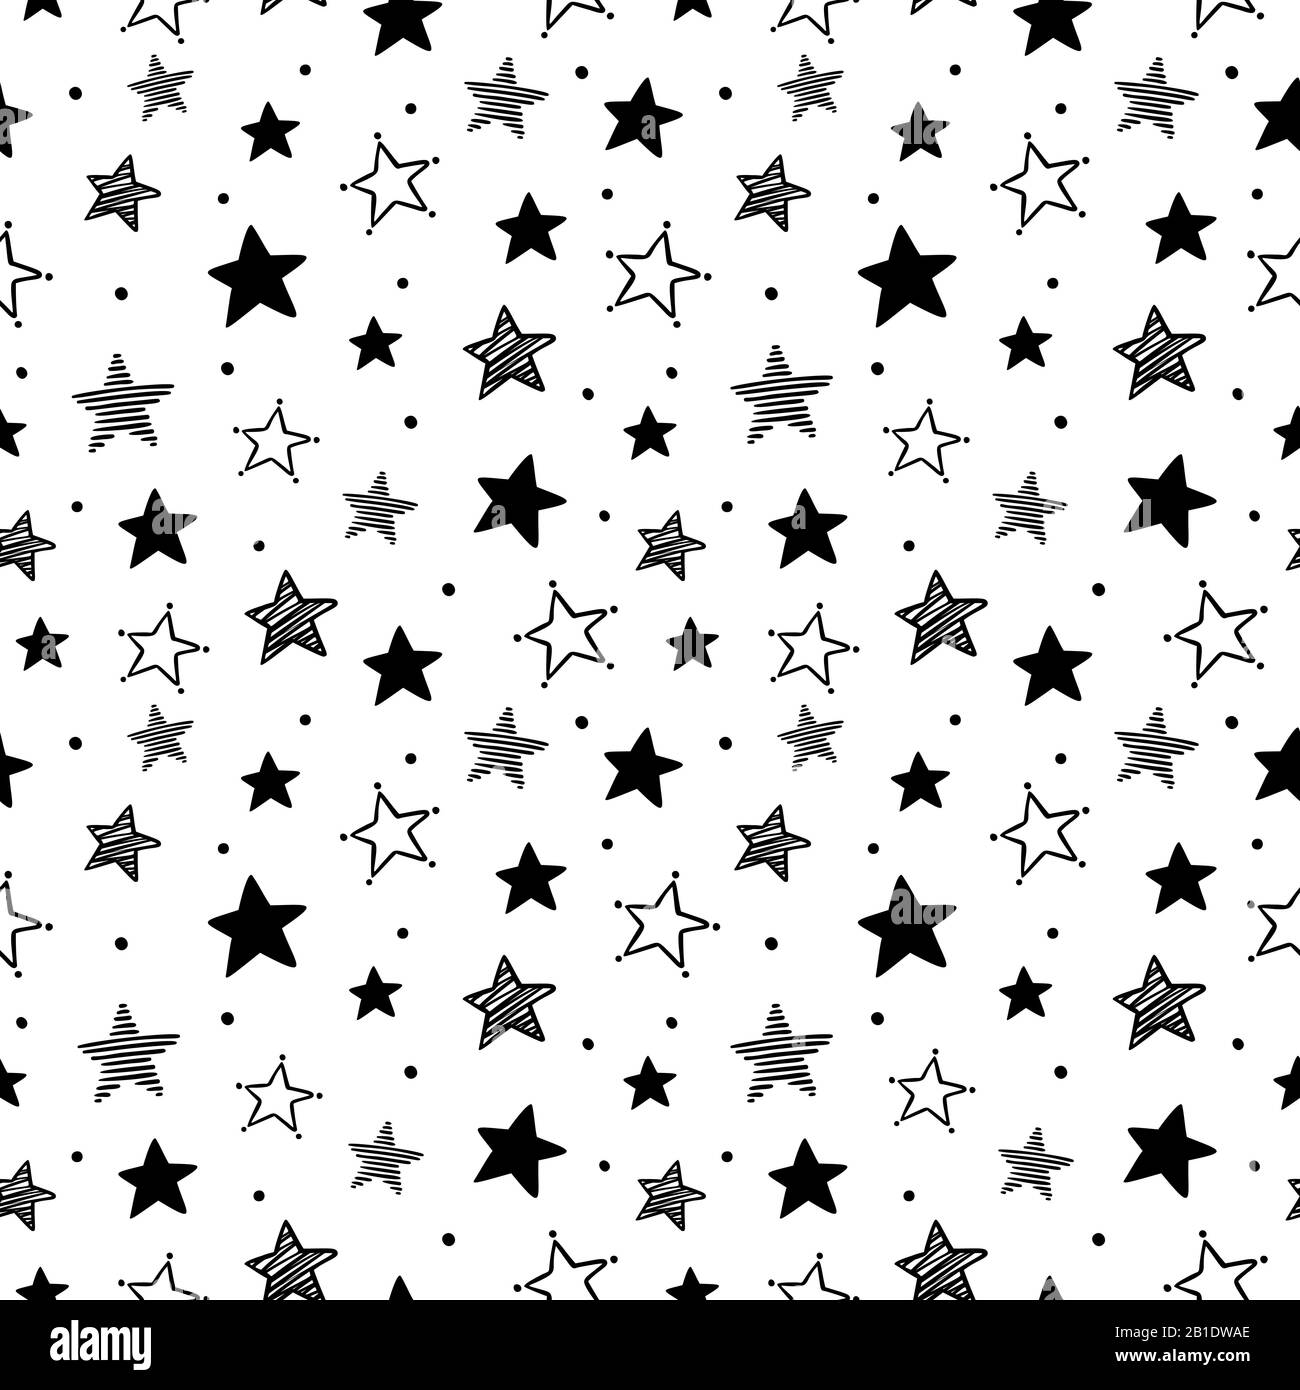 Doodle stars pattern. Seamless star ornaments, night sky and starry ornament vector illustration Stock Vector